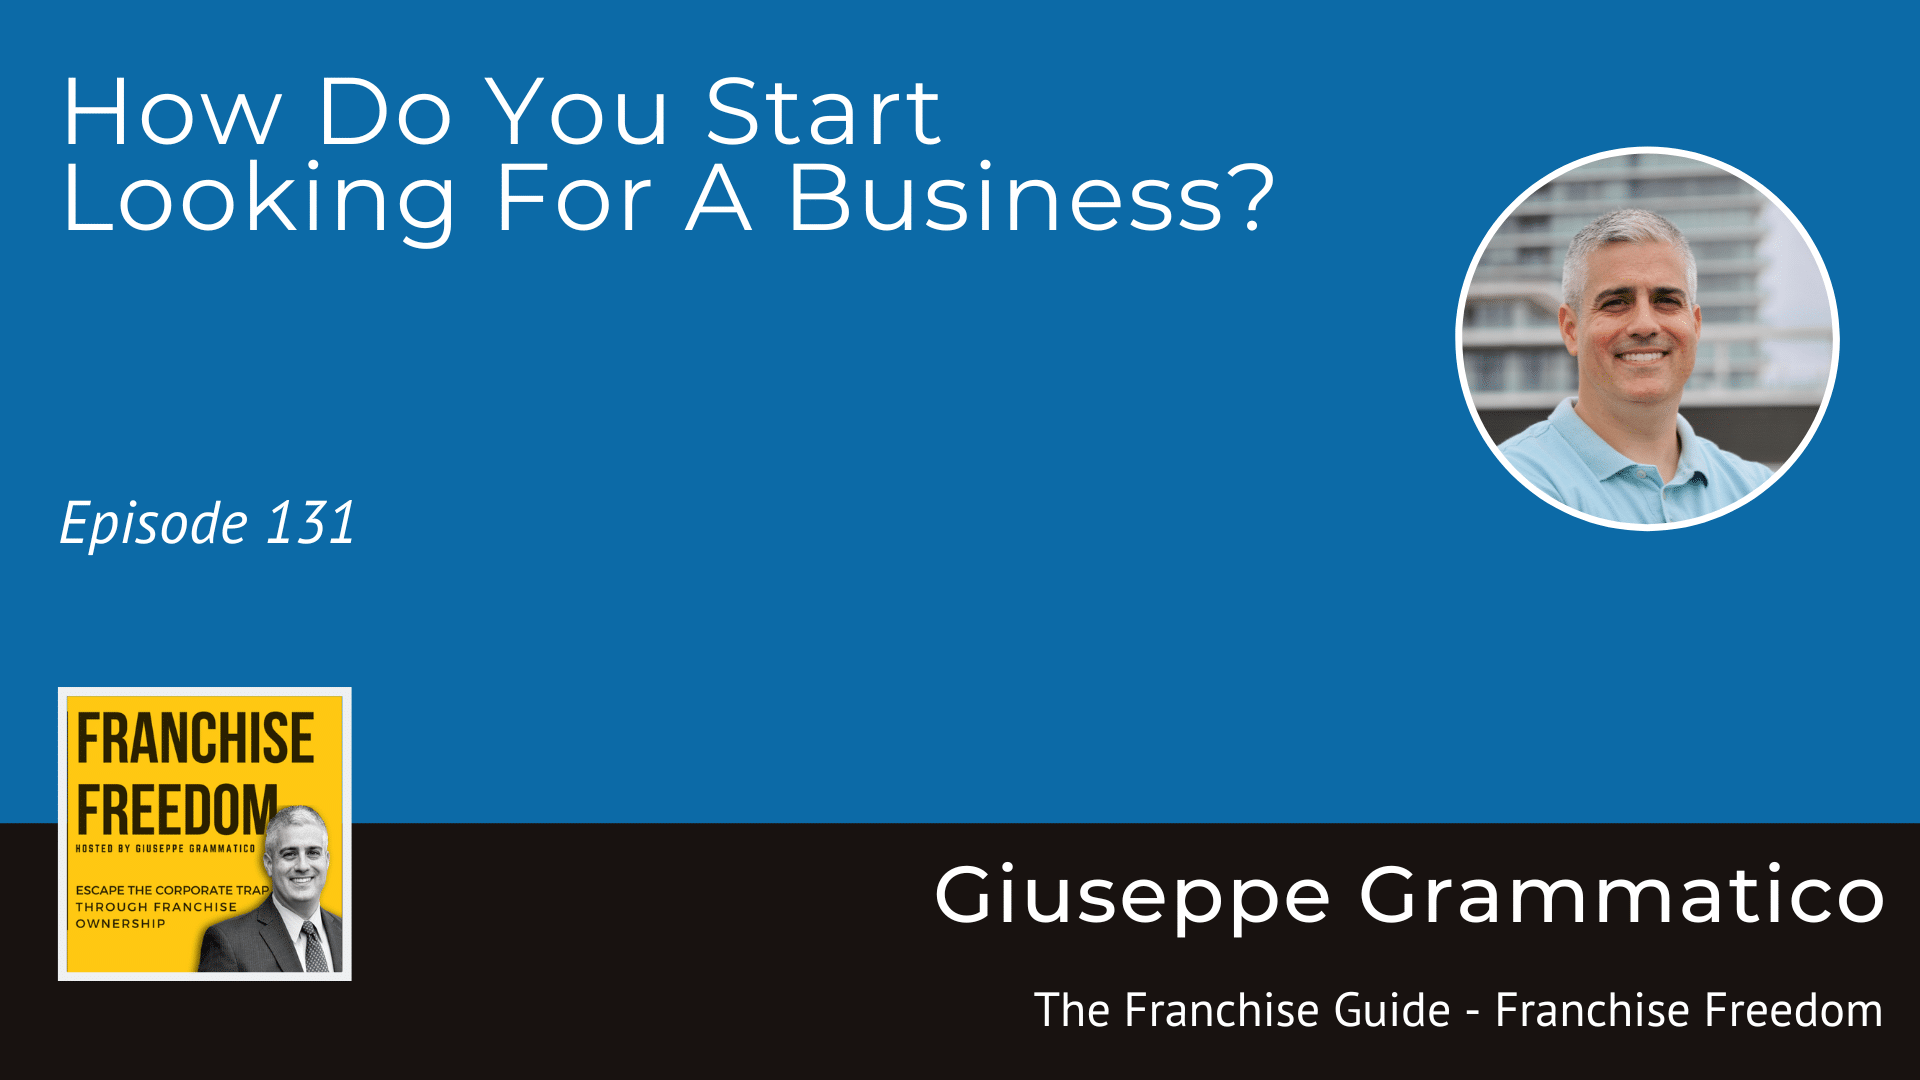 How Do You Start Looking For A Business?